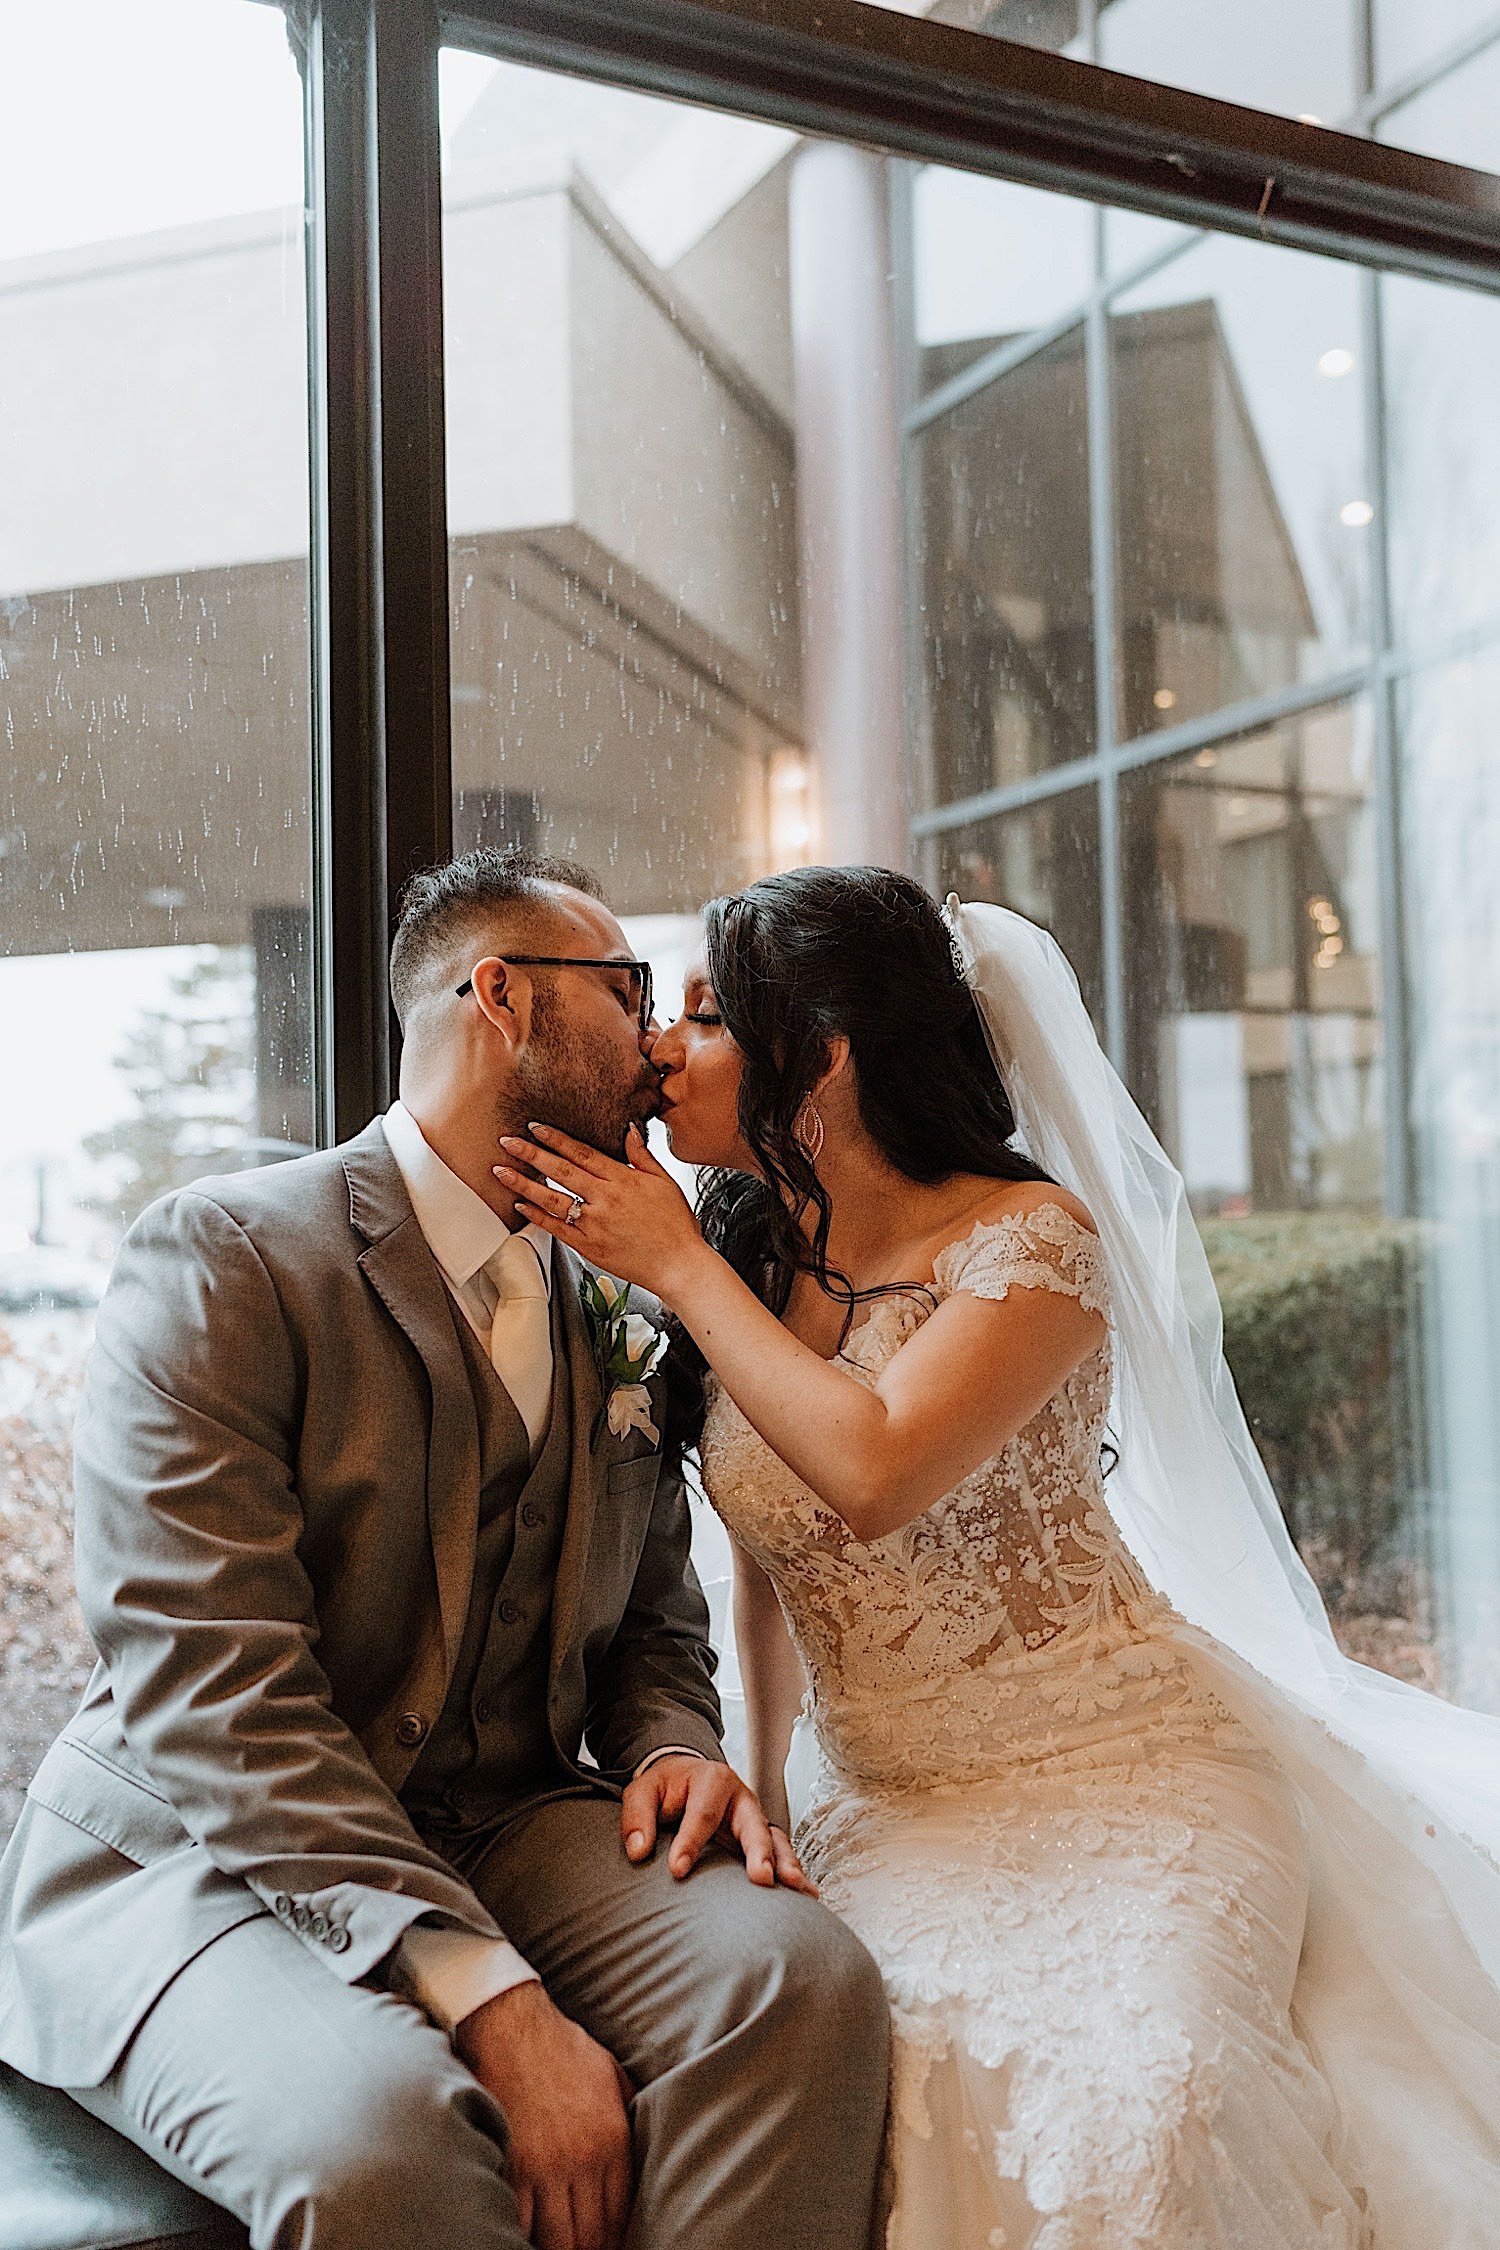 Bride and groom kiss while seated in front of a window while it rains outside